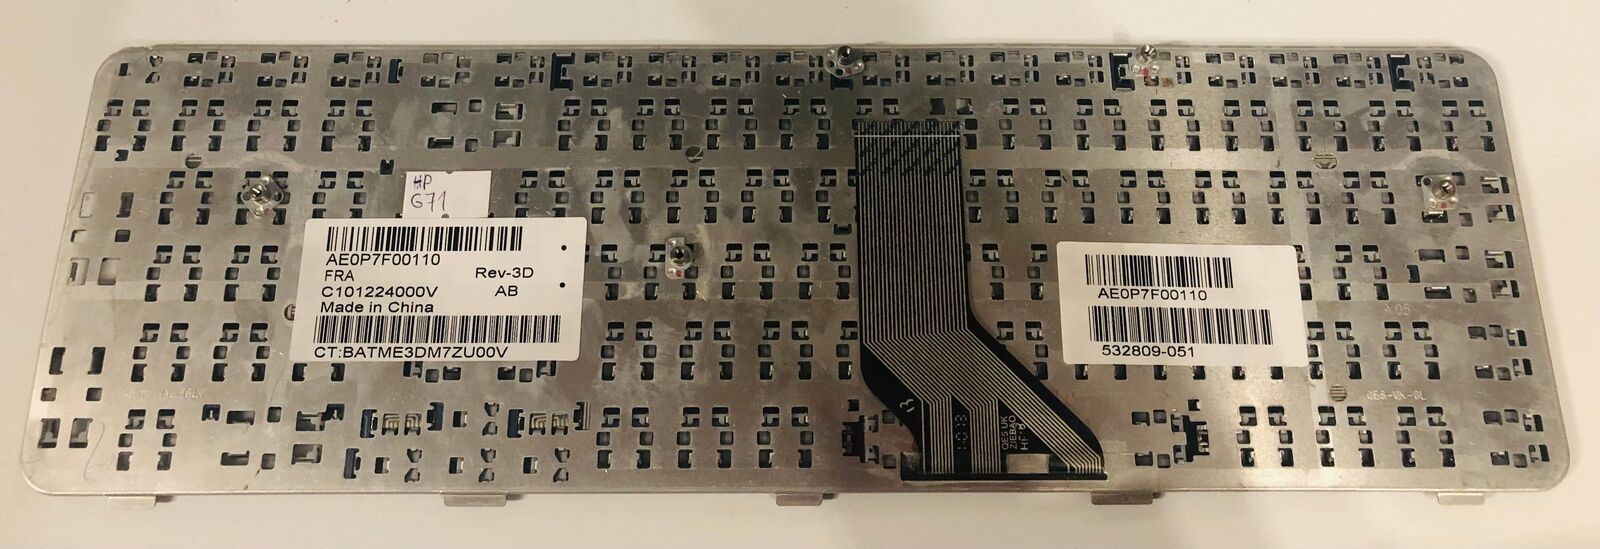 532809-051 keyboard - HP G71 - for parts